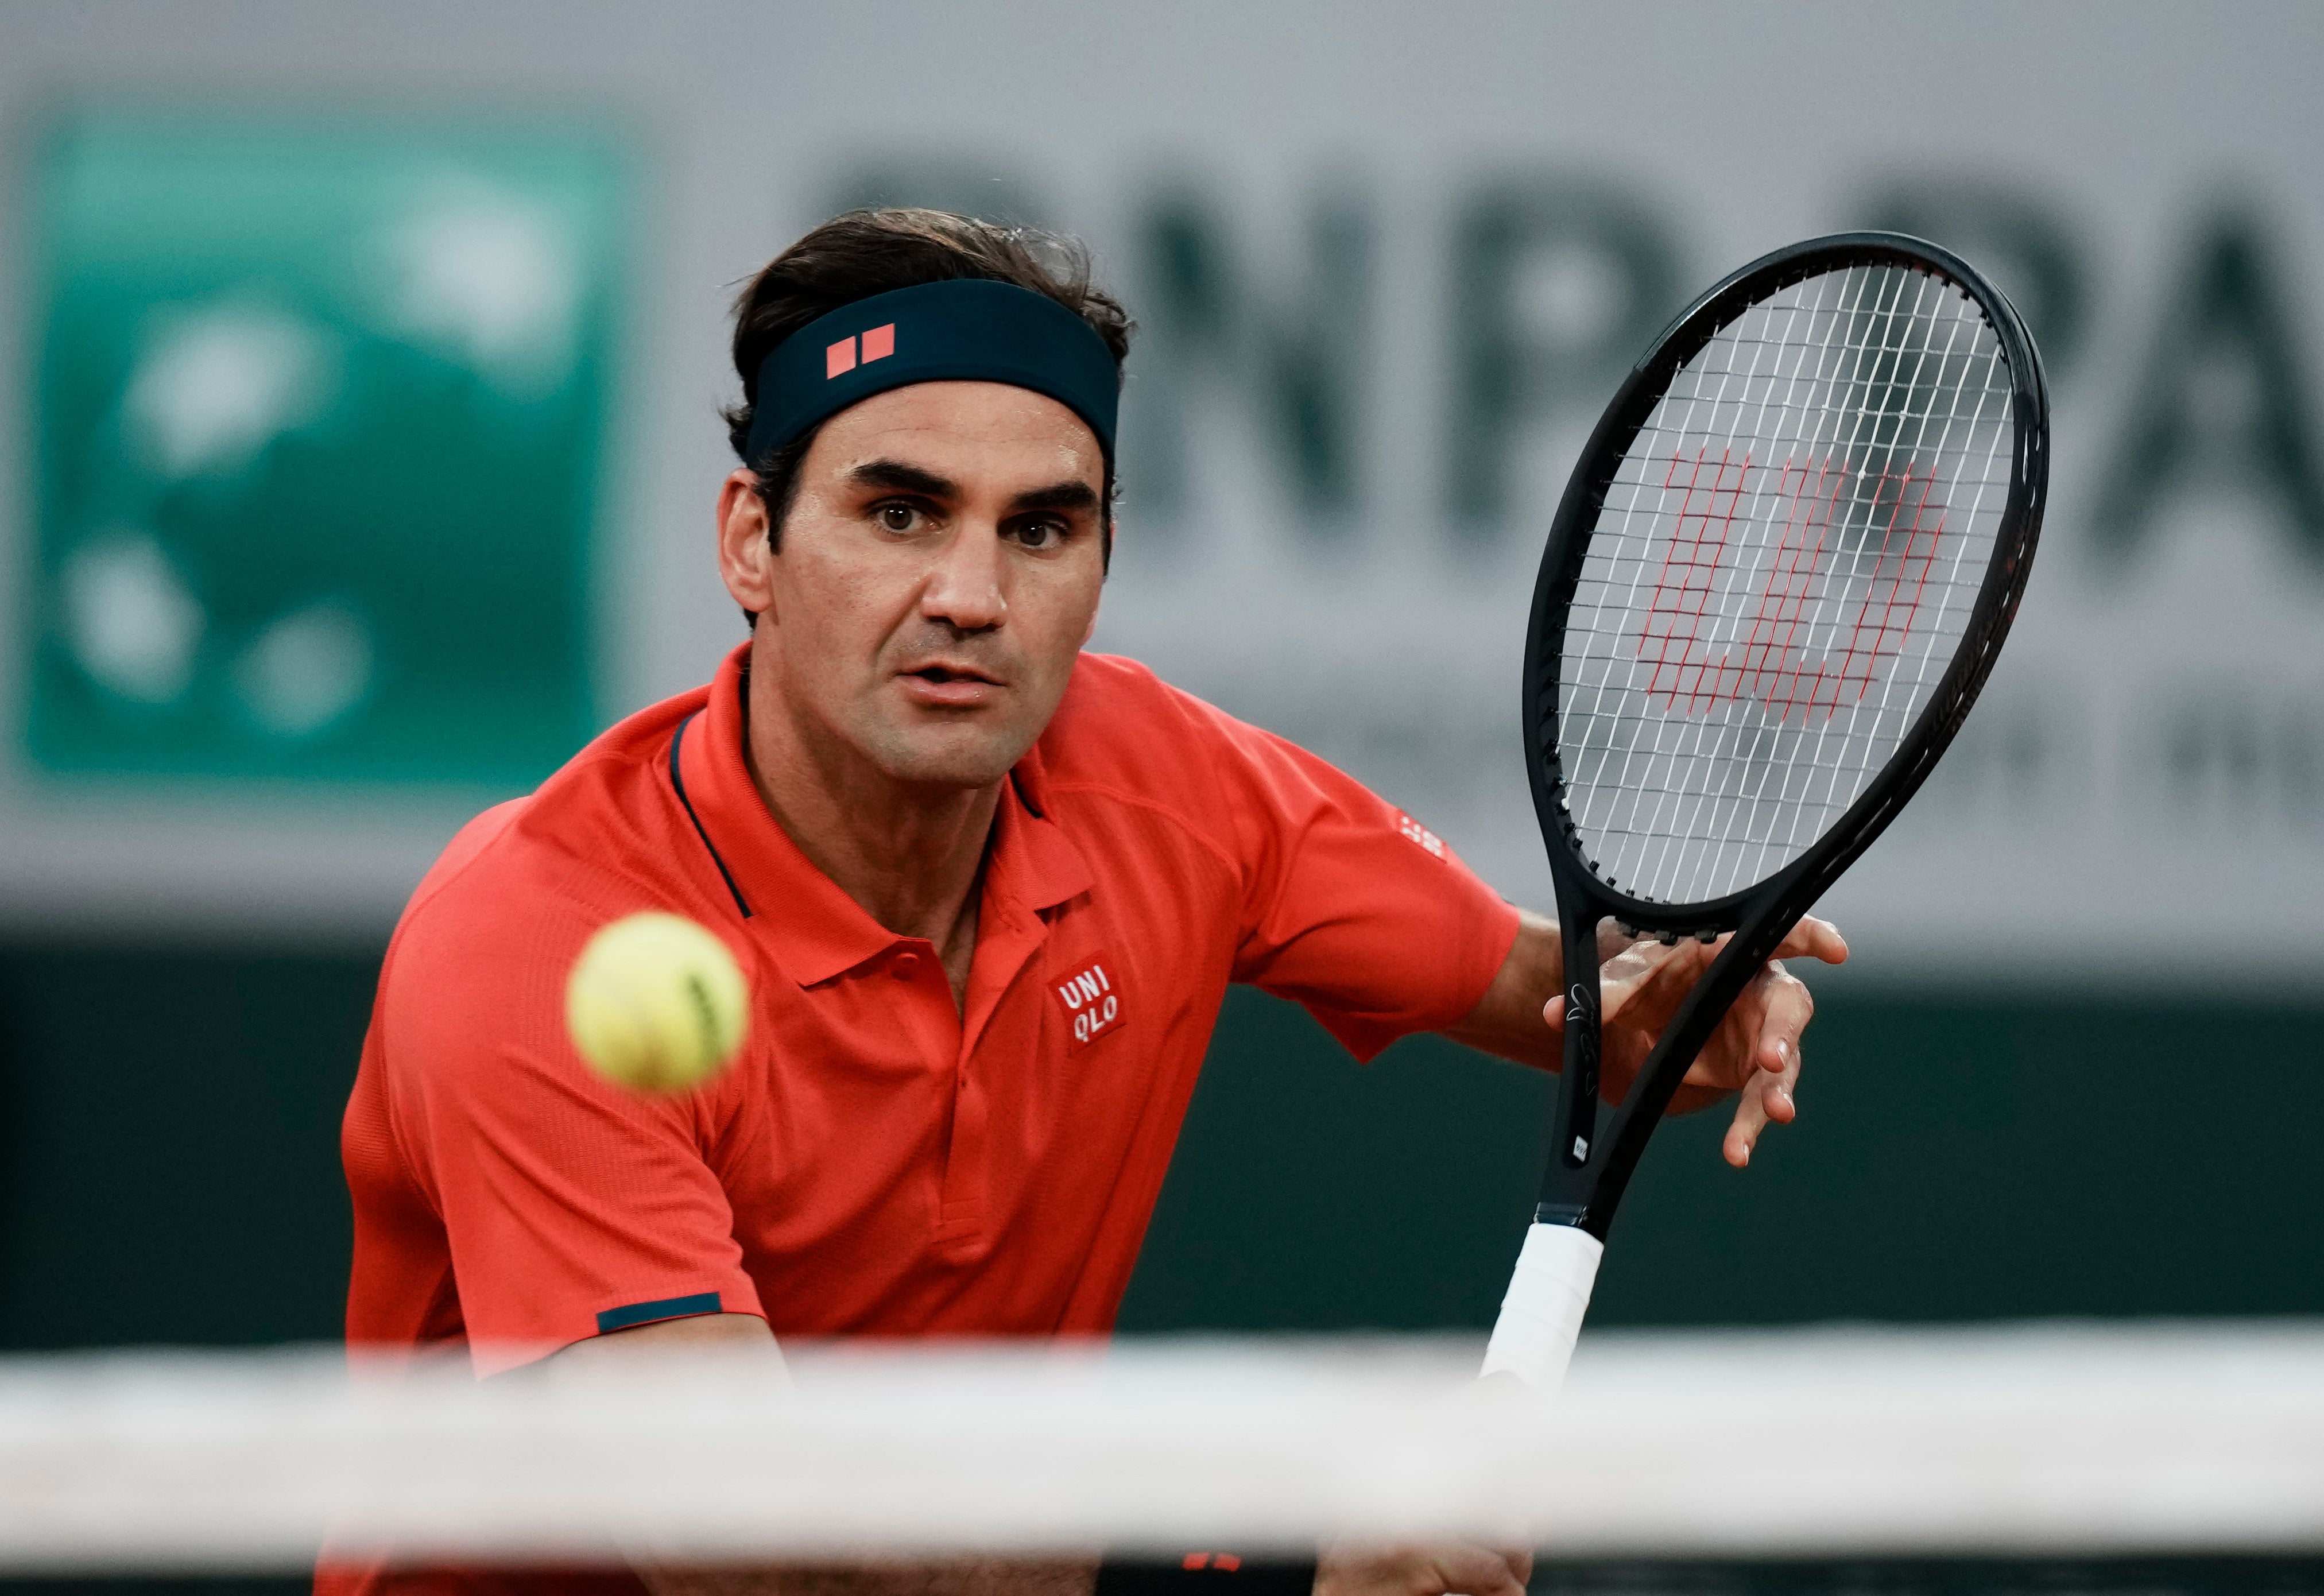 Roger Federer ground out a tense victory over Dominik Koepfer